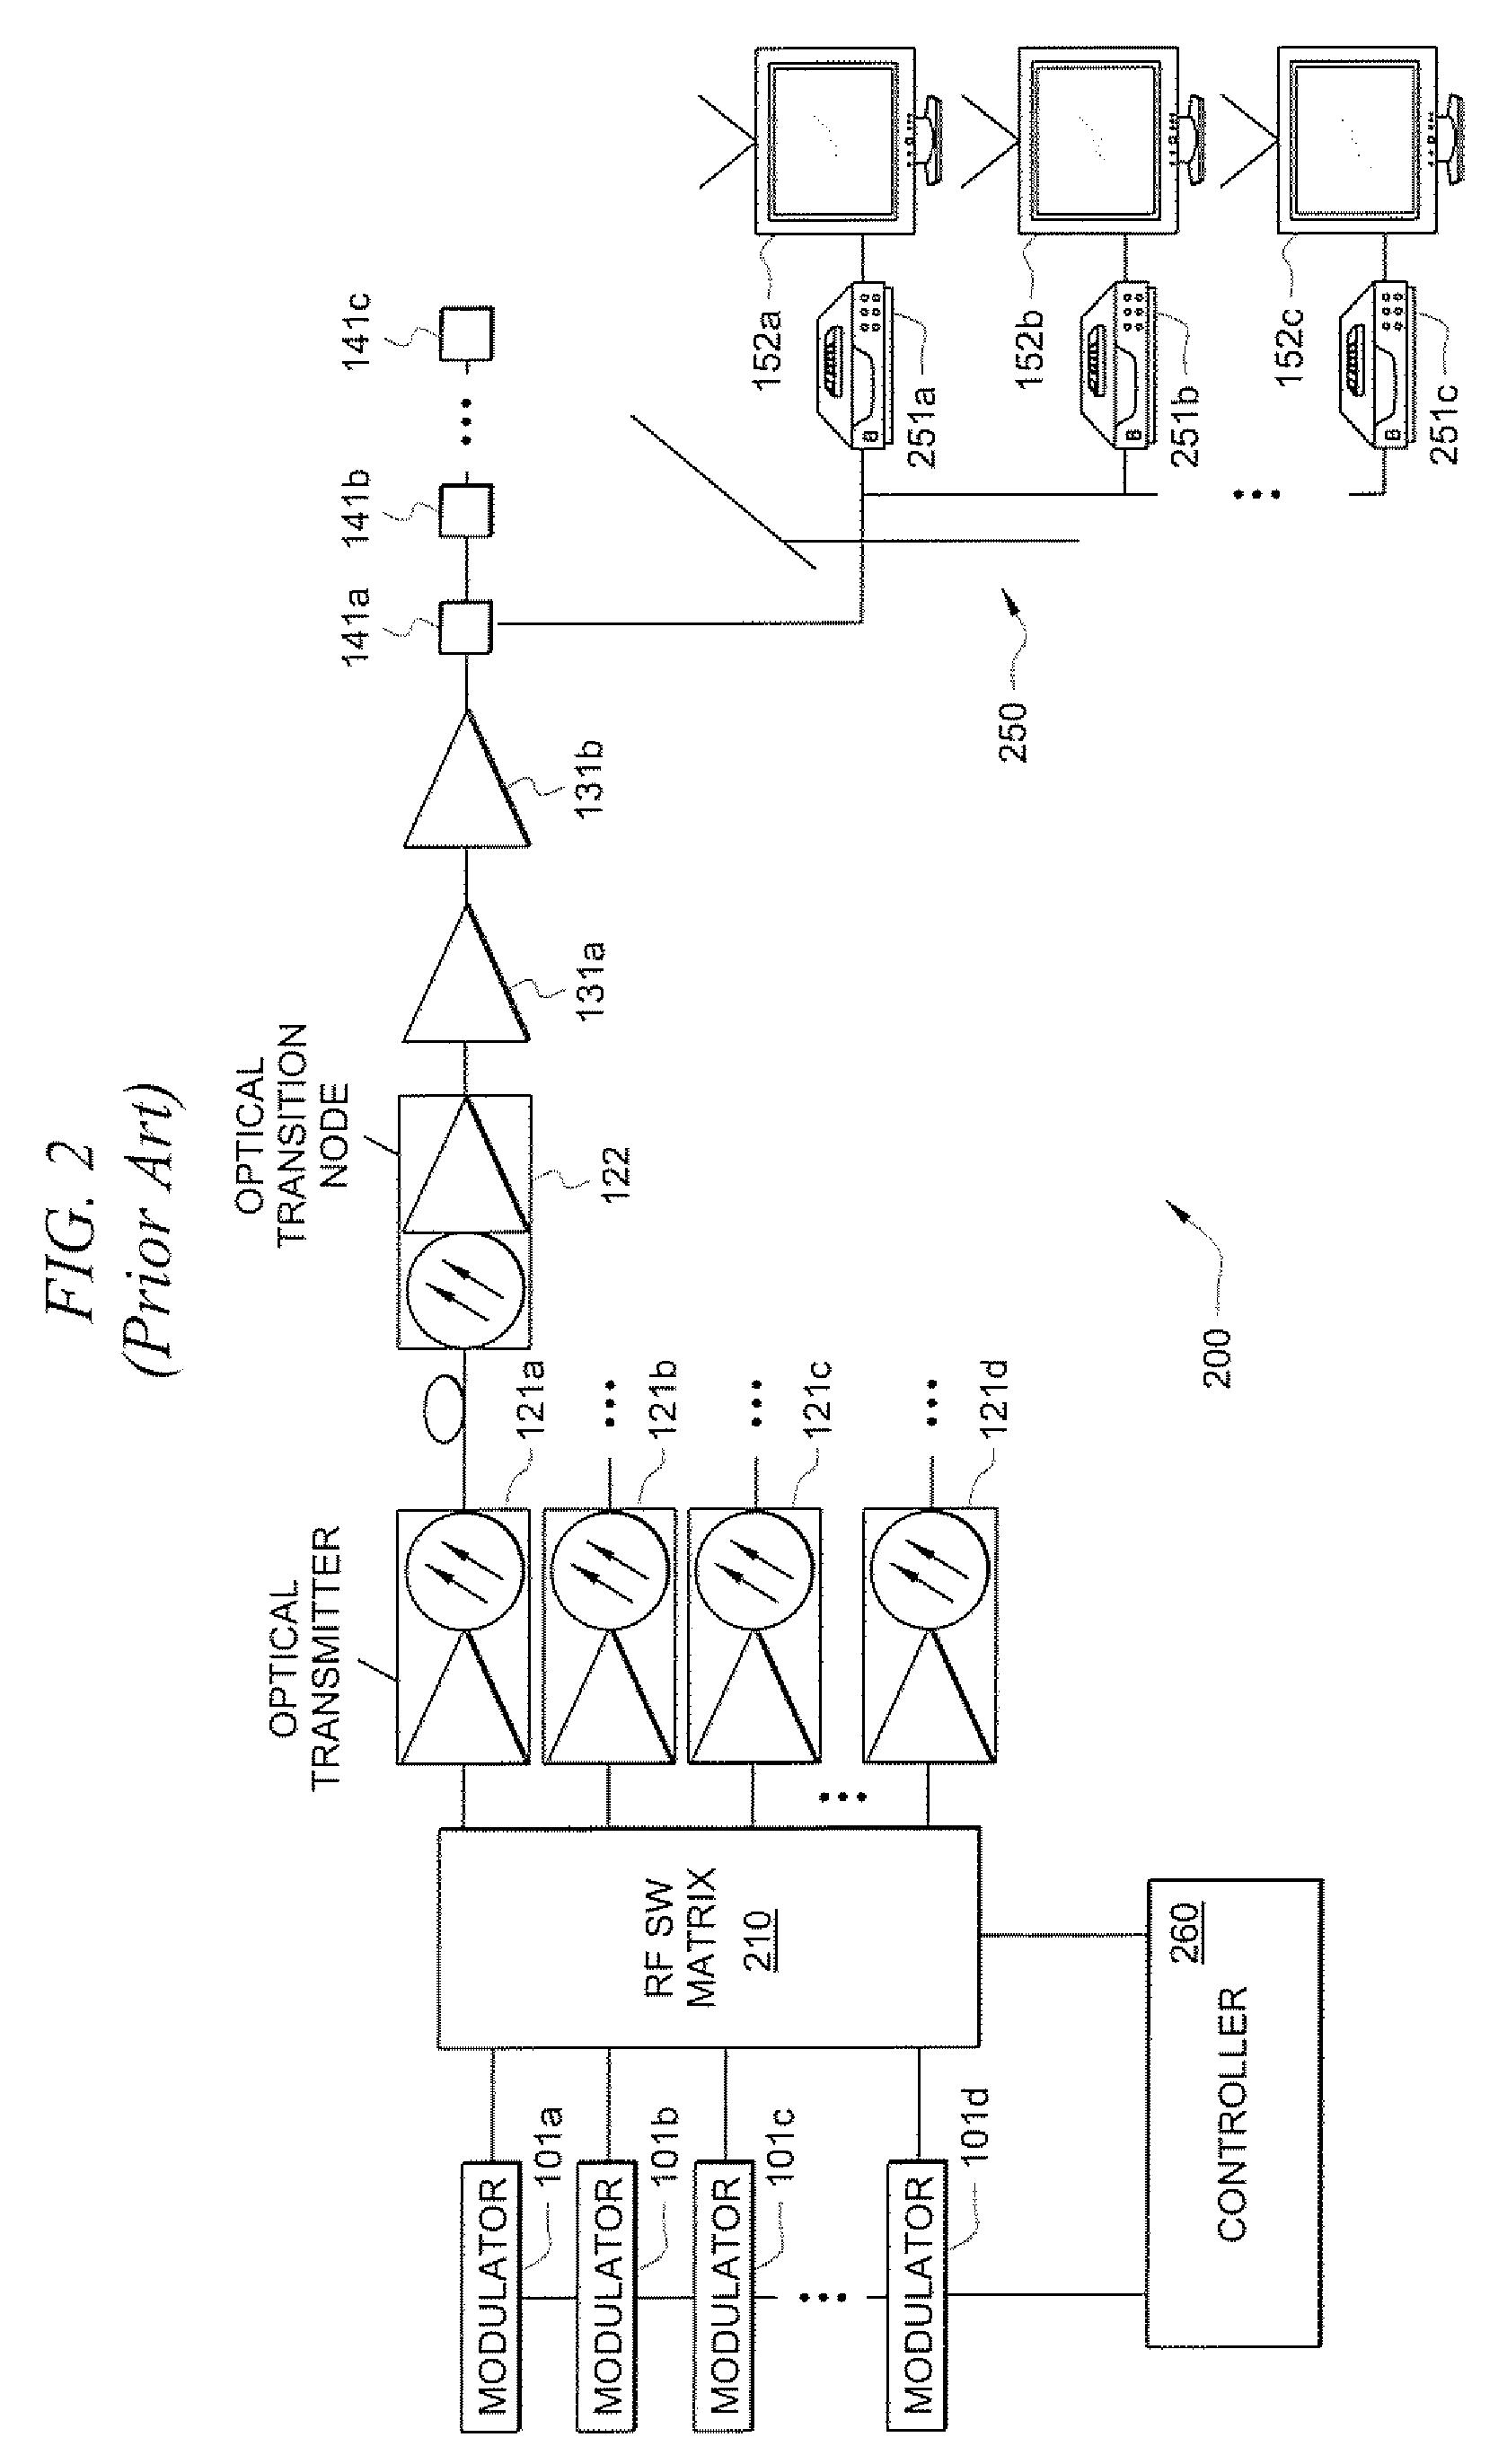 Systems and methods for broadband transmission of signals